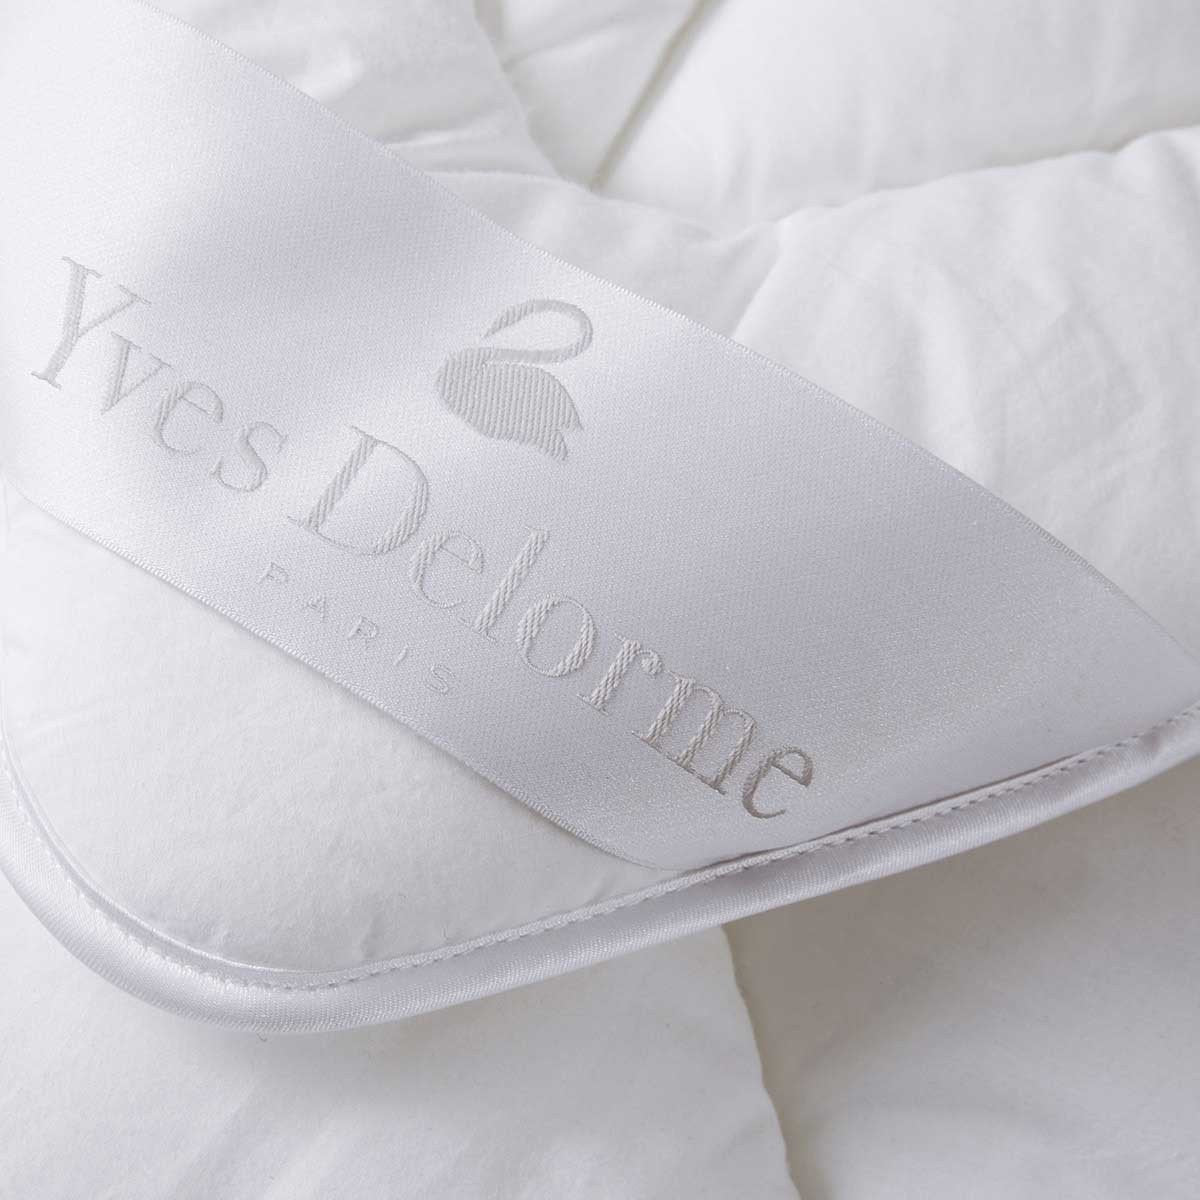 Actuel Anti-Allergy Down Alternative Comforter by Yves Delorme - Details